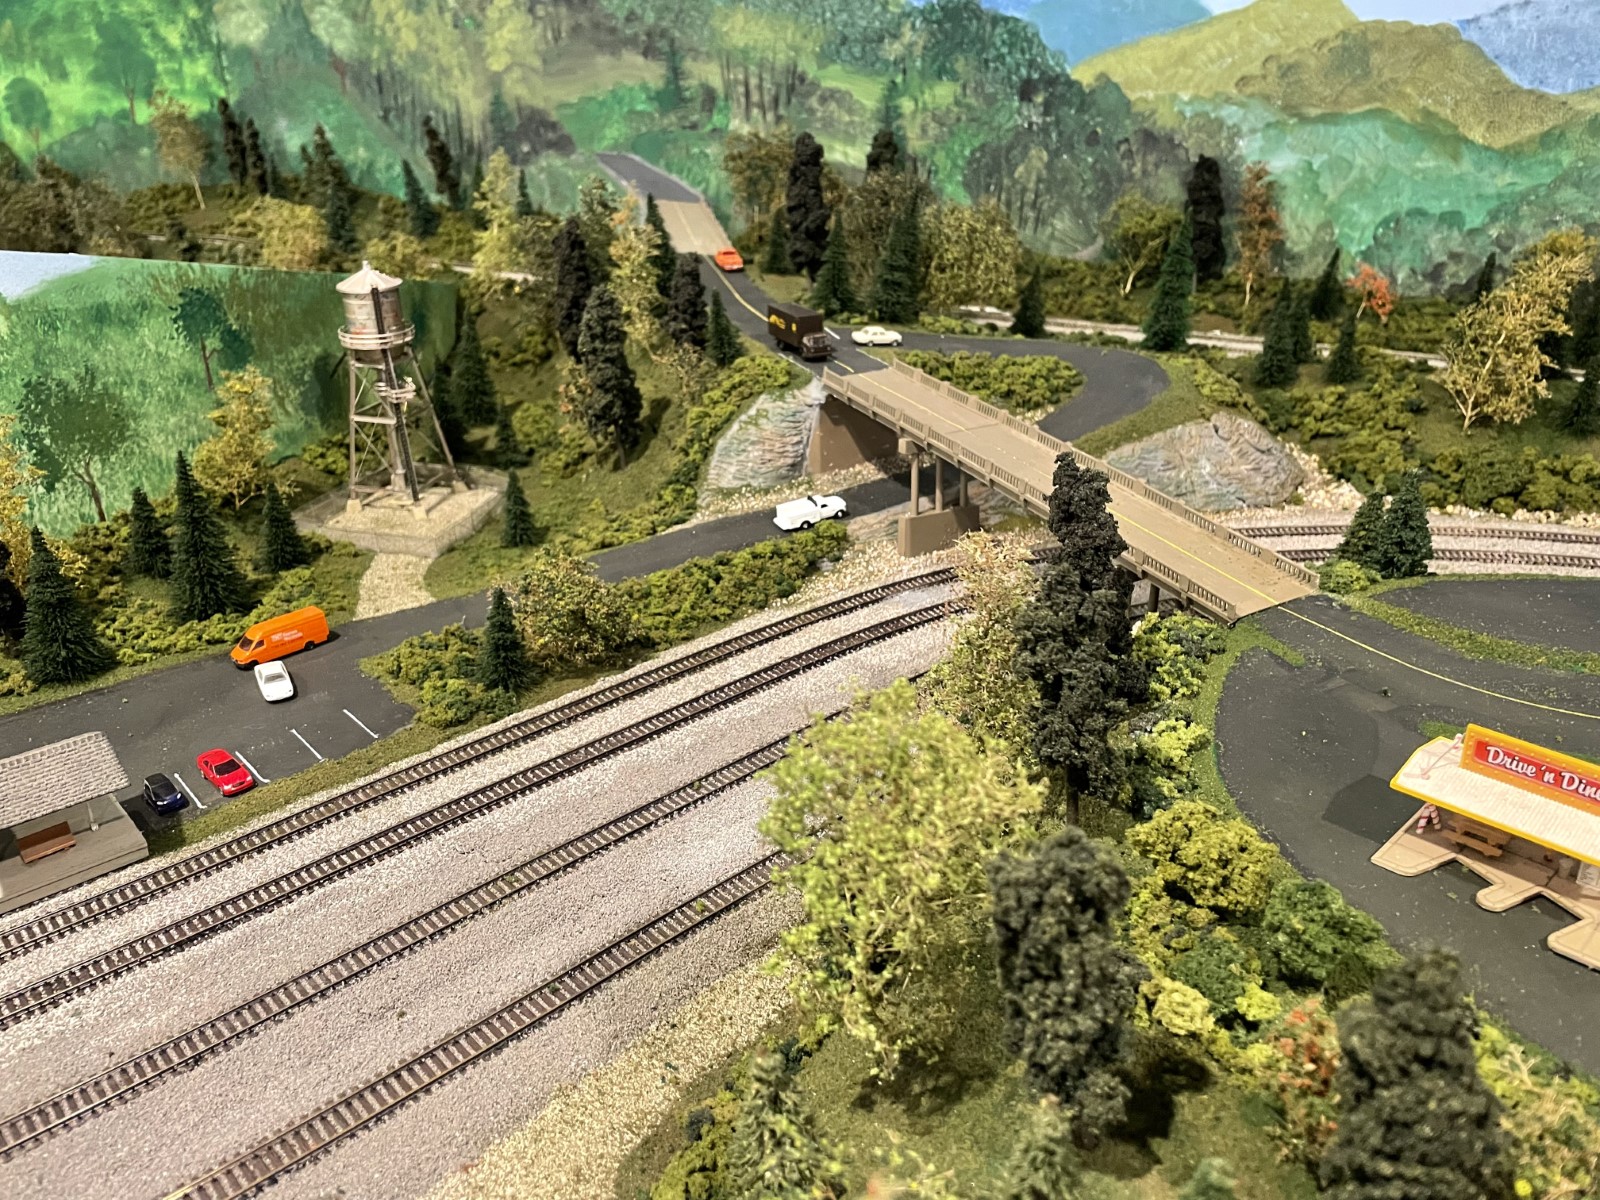 Lawrence Romaine's N Scale